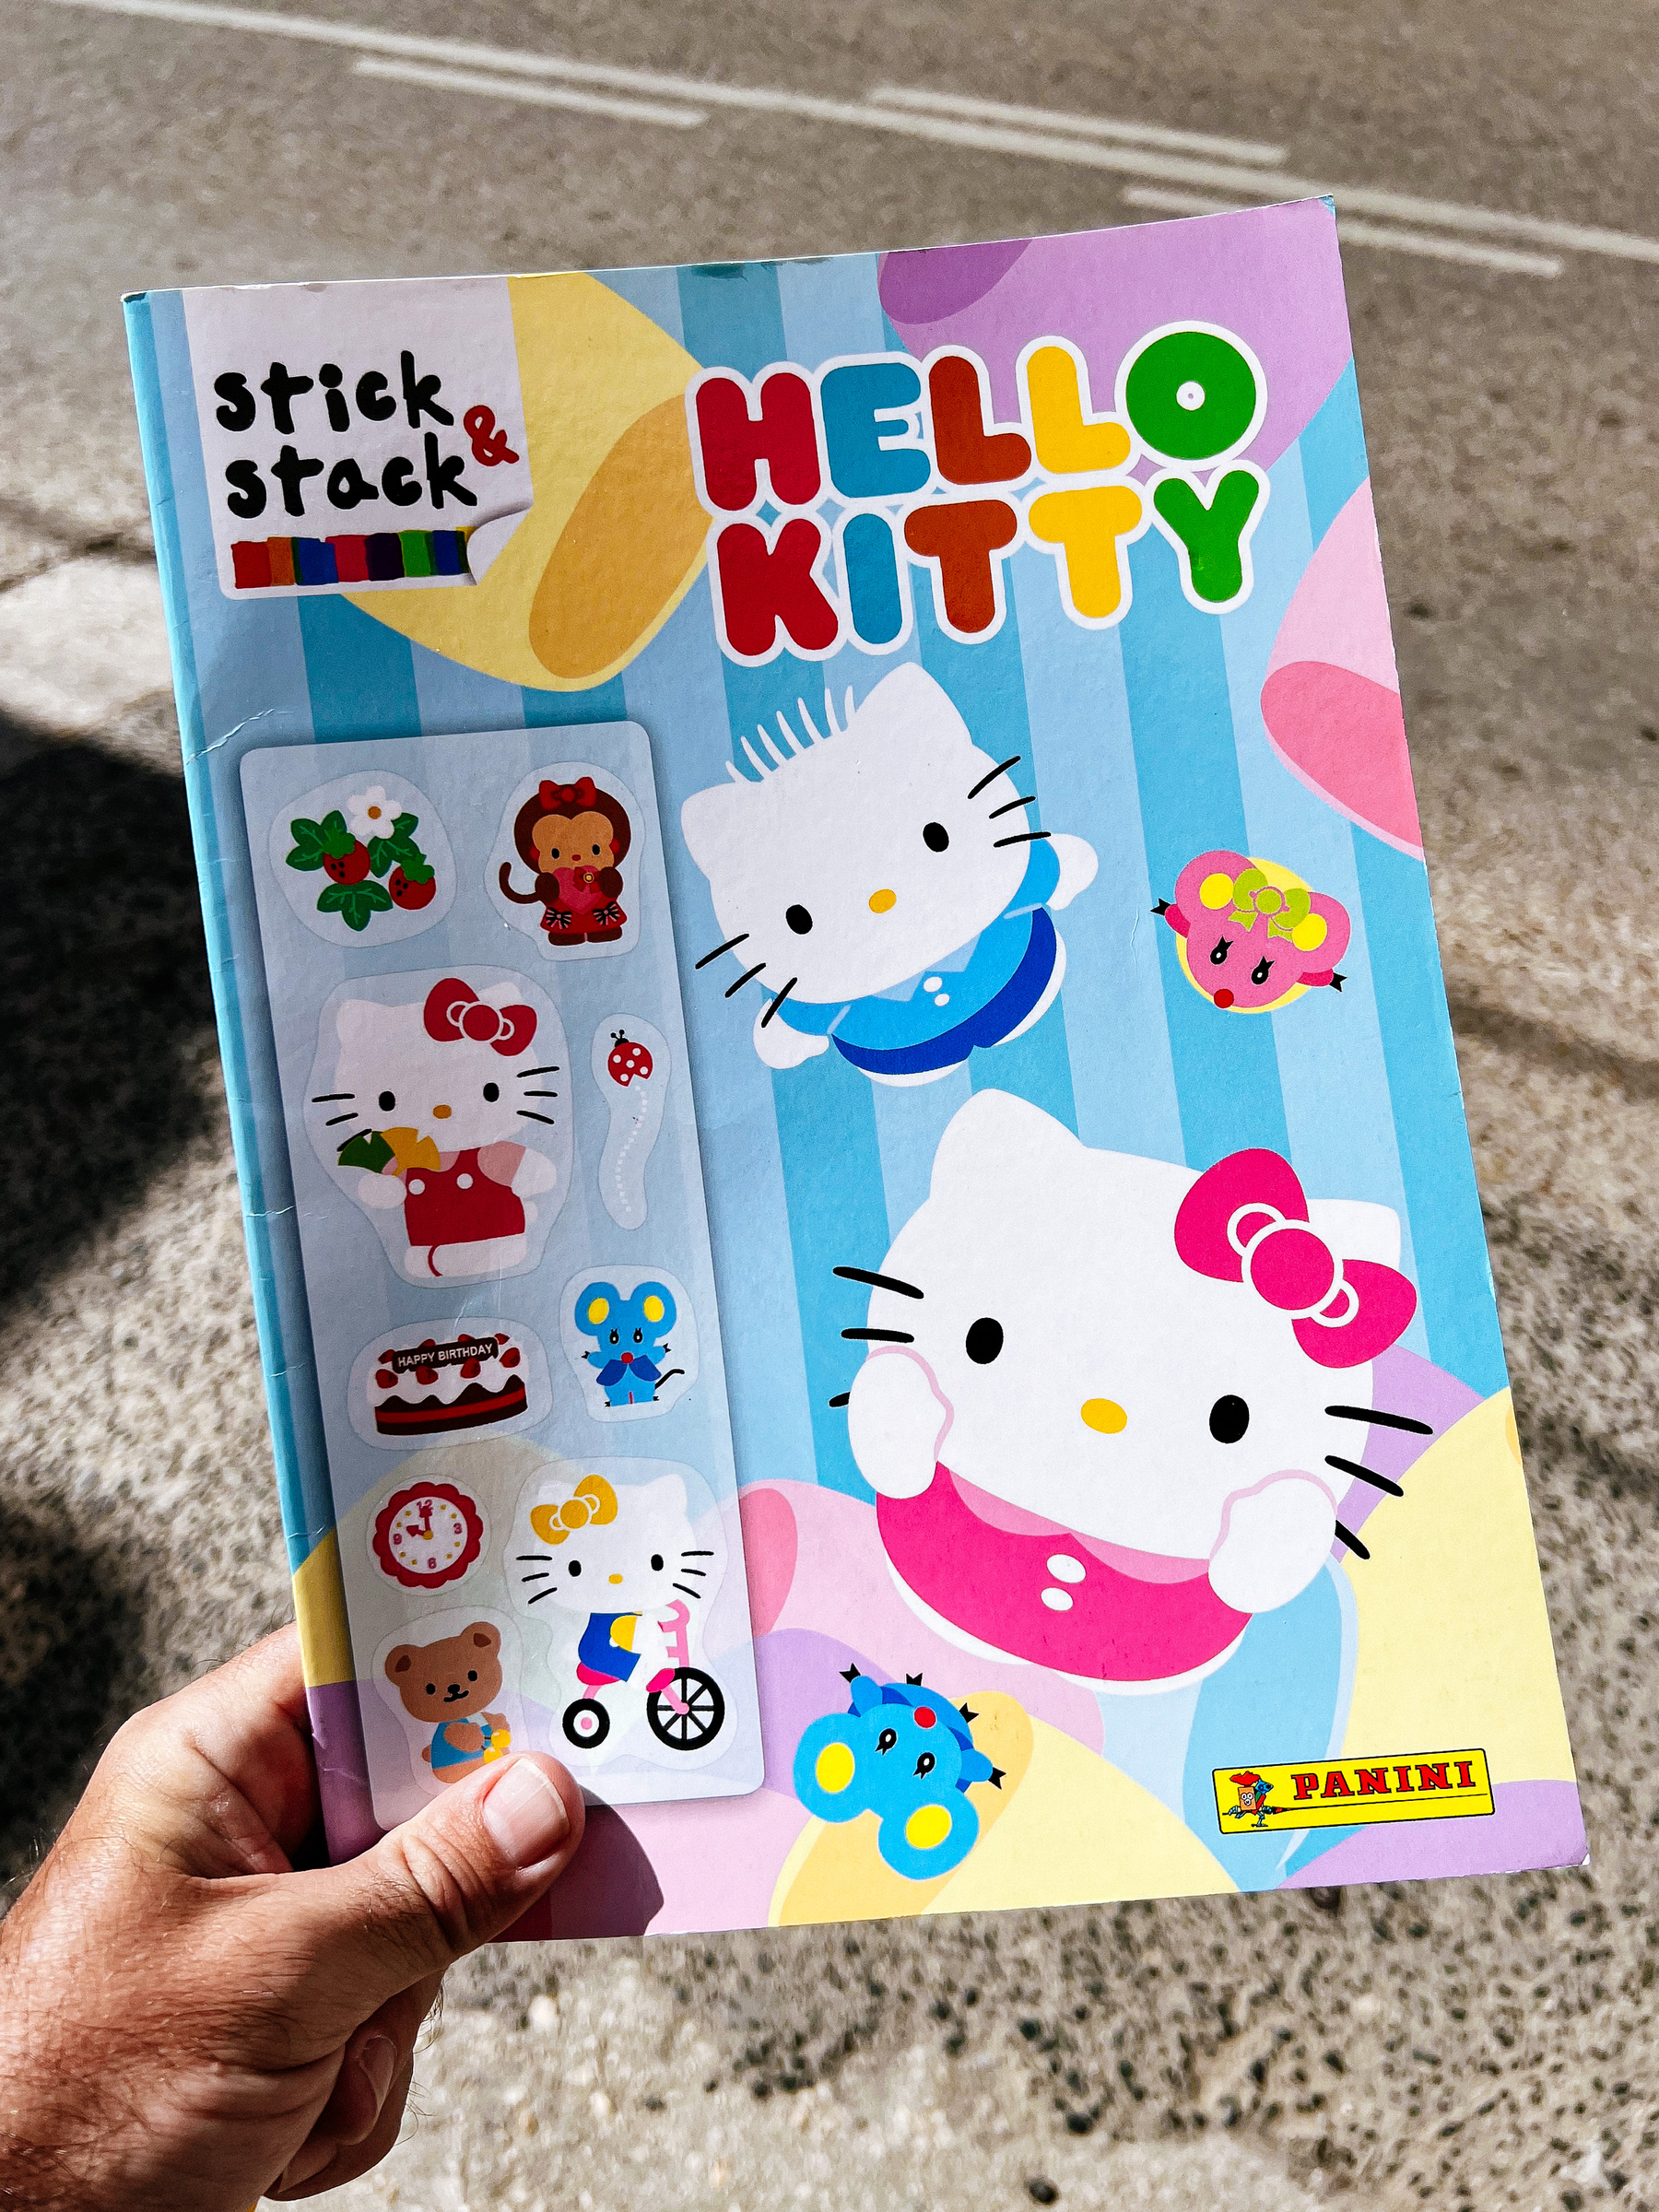 A magazine with Hello Kitty is seen on a man’s hand. 